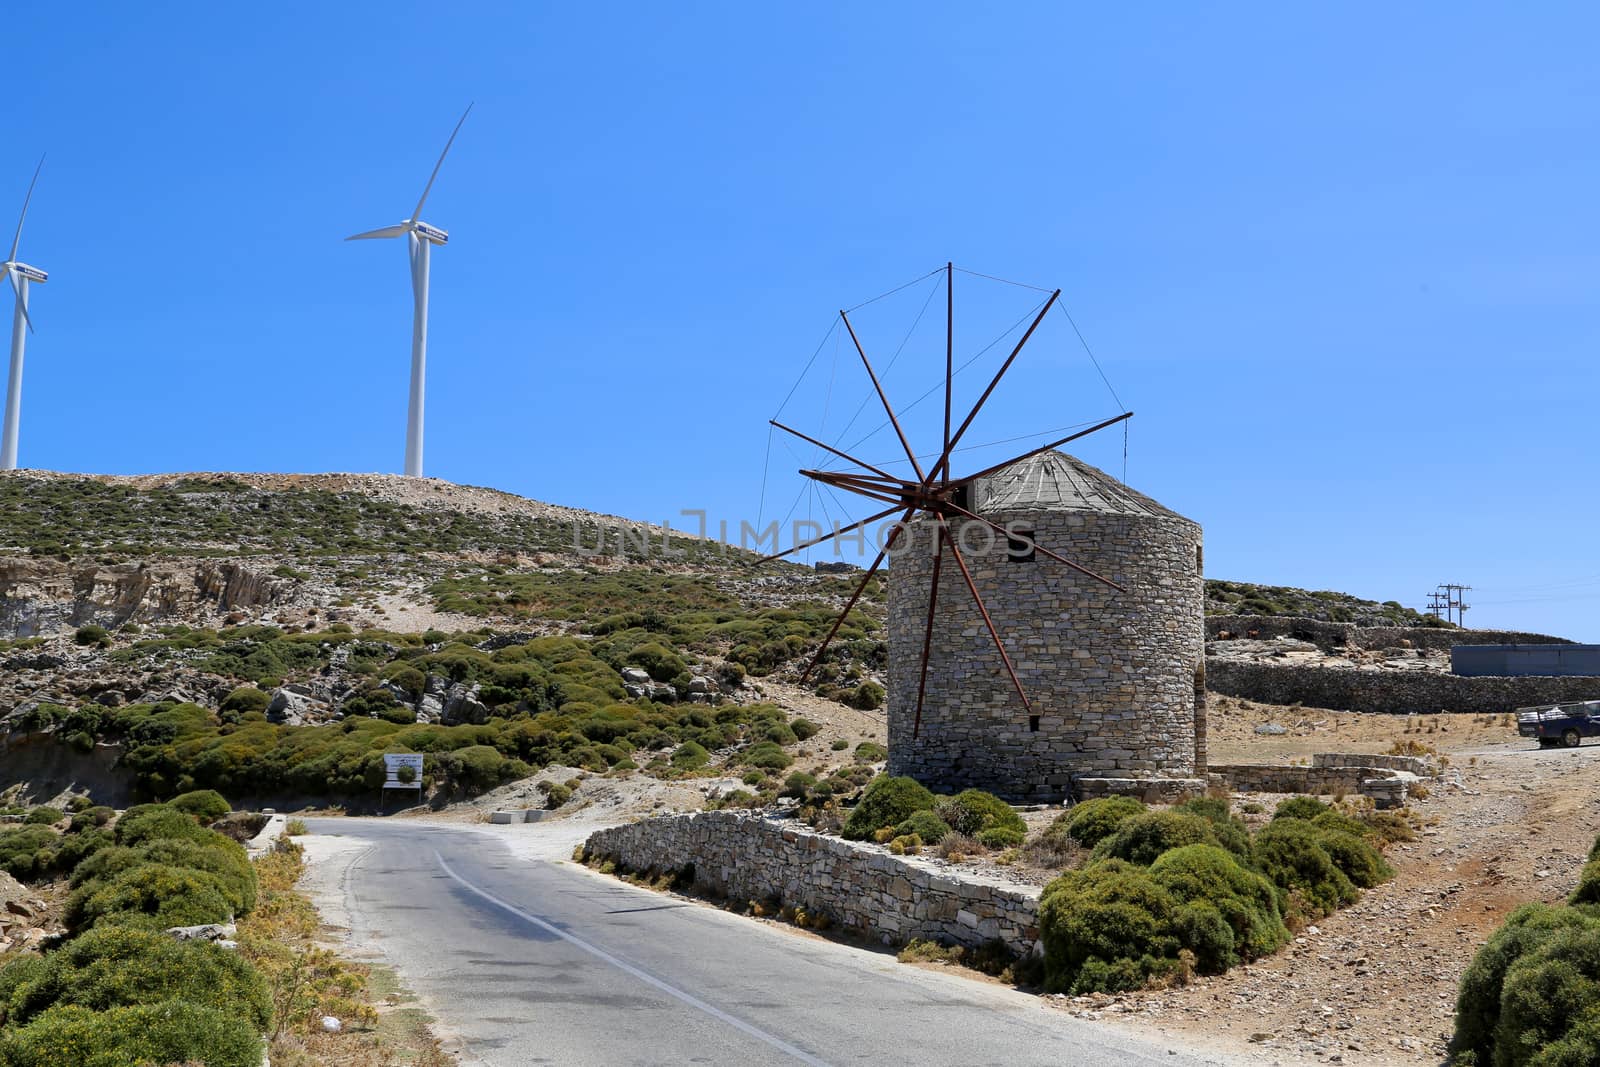 A new and old wind mill farm in Greece